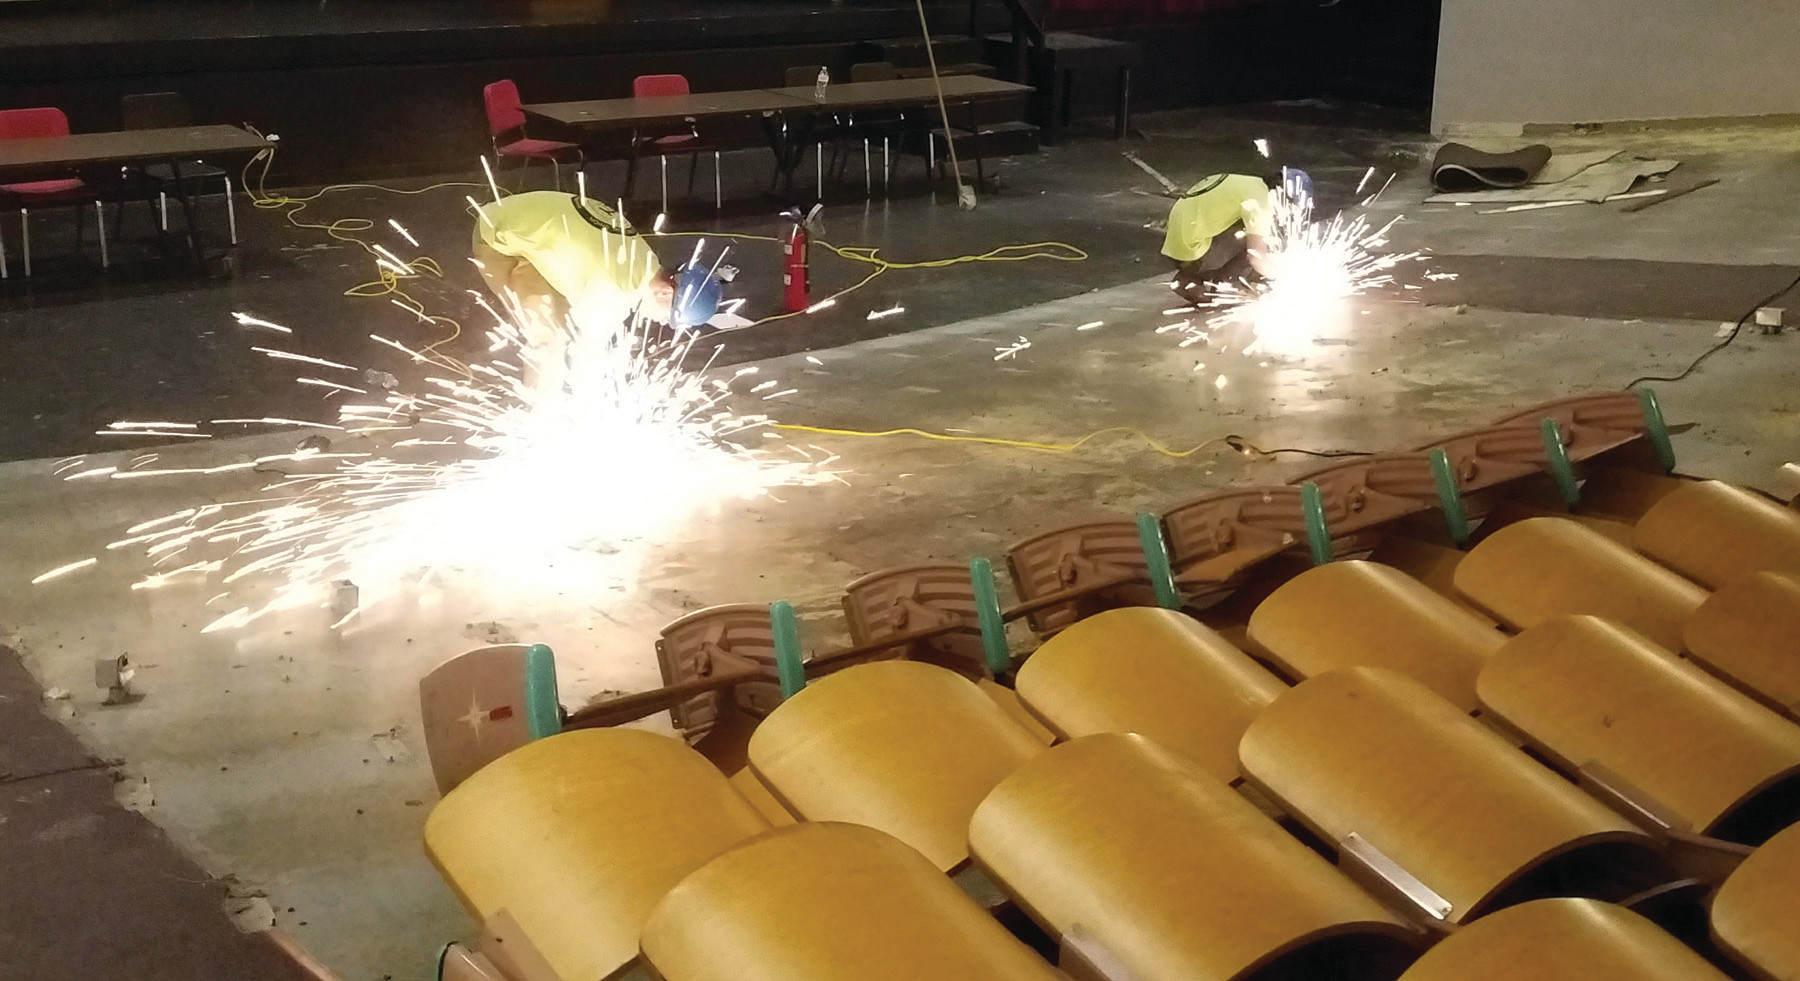 OUT OF THE CLASSROOM AND ON THE JOB: Sparks were flying on June 22 at Cranston West as the newest graduates from the New England Laborers’/Cranston Public Schools Construction Career Academy put their education to the test, using the skills they learned in school on their first official job site.